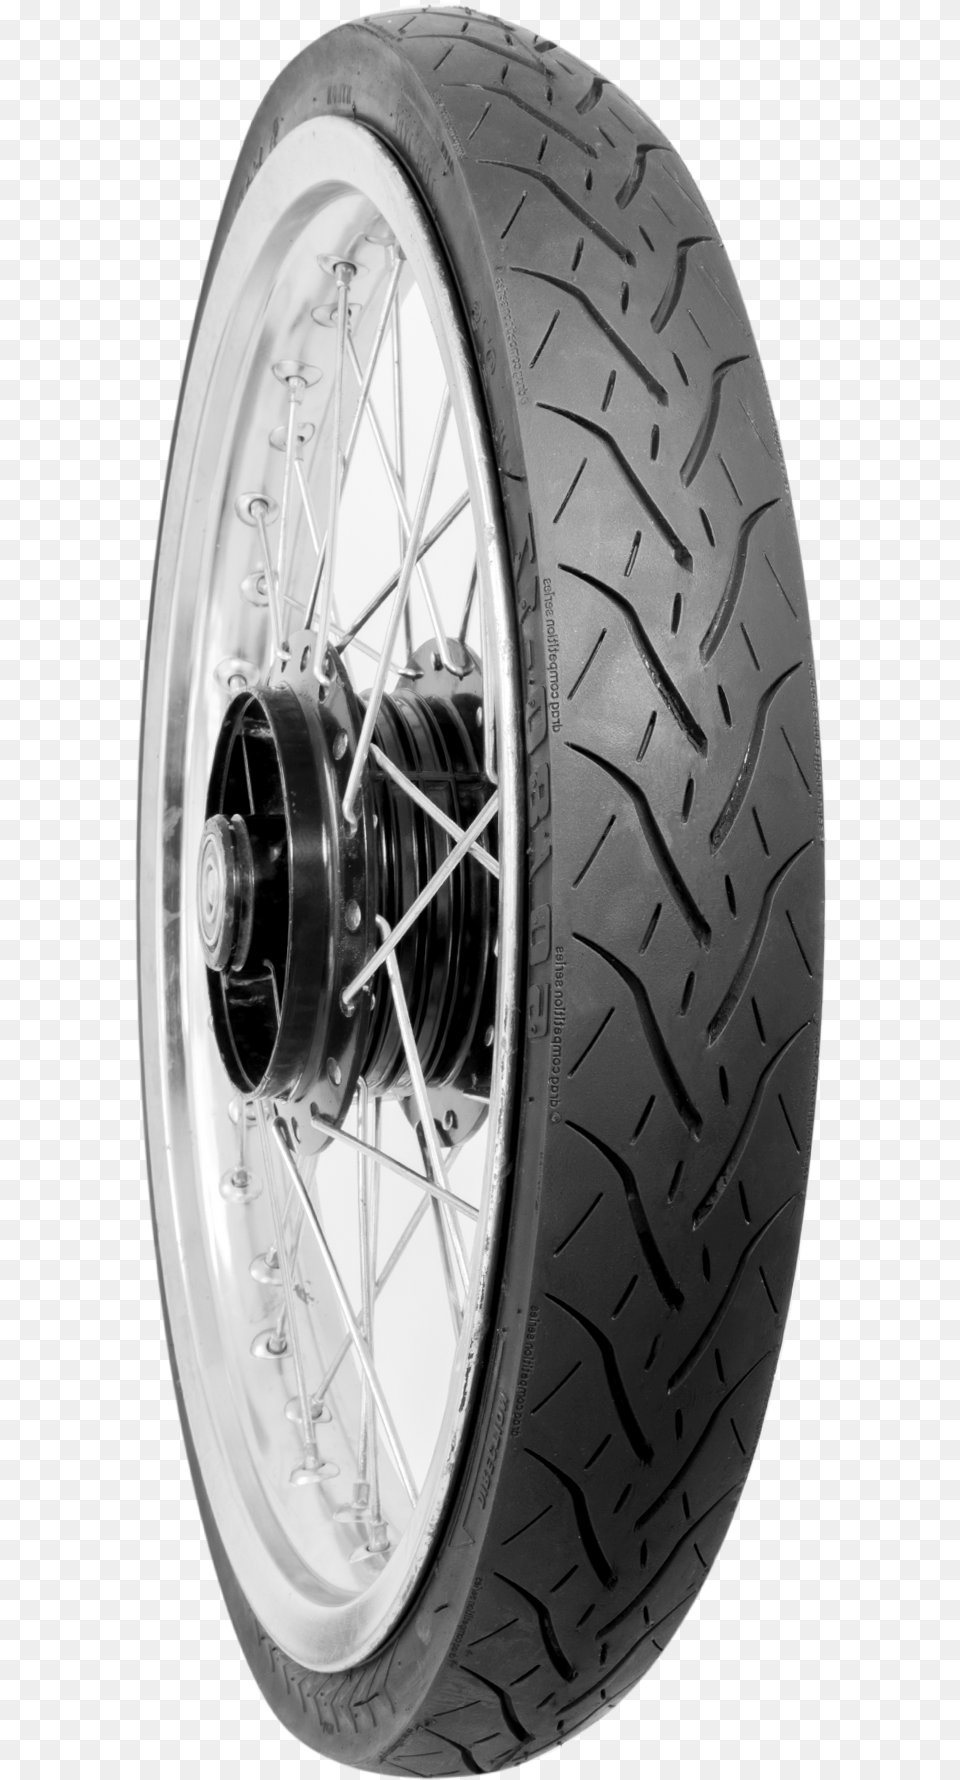 Hydra Synthetic Rubber, Alloy Wheel, Car, Car Wheel, Machine Png